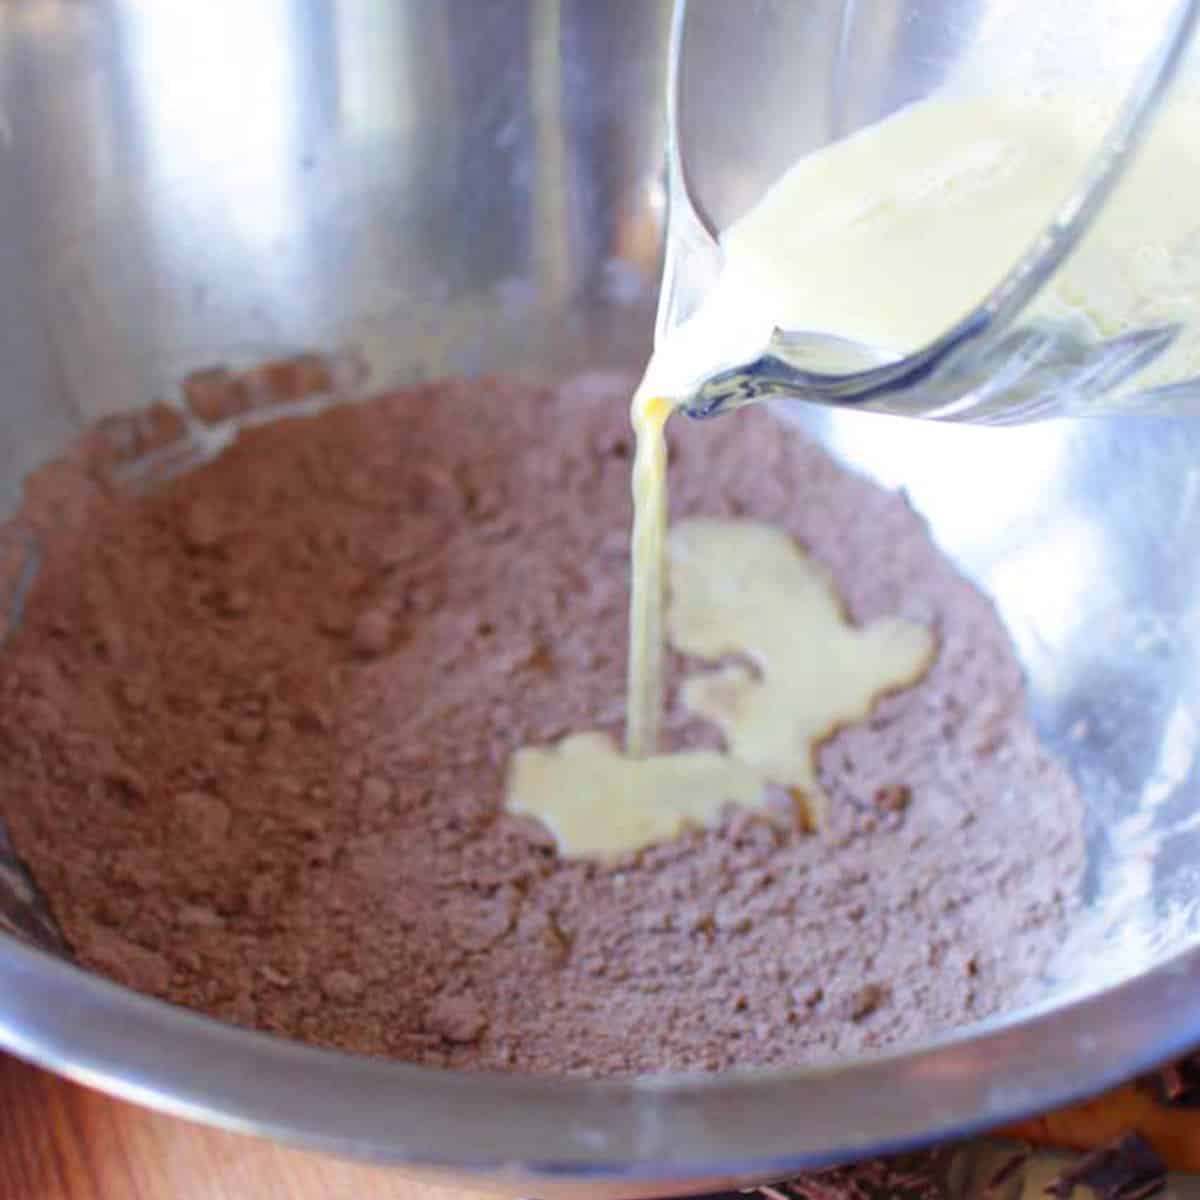 pouring milk into the dry ingredients in a mixing bowl for scones.